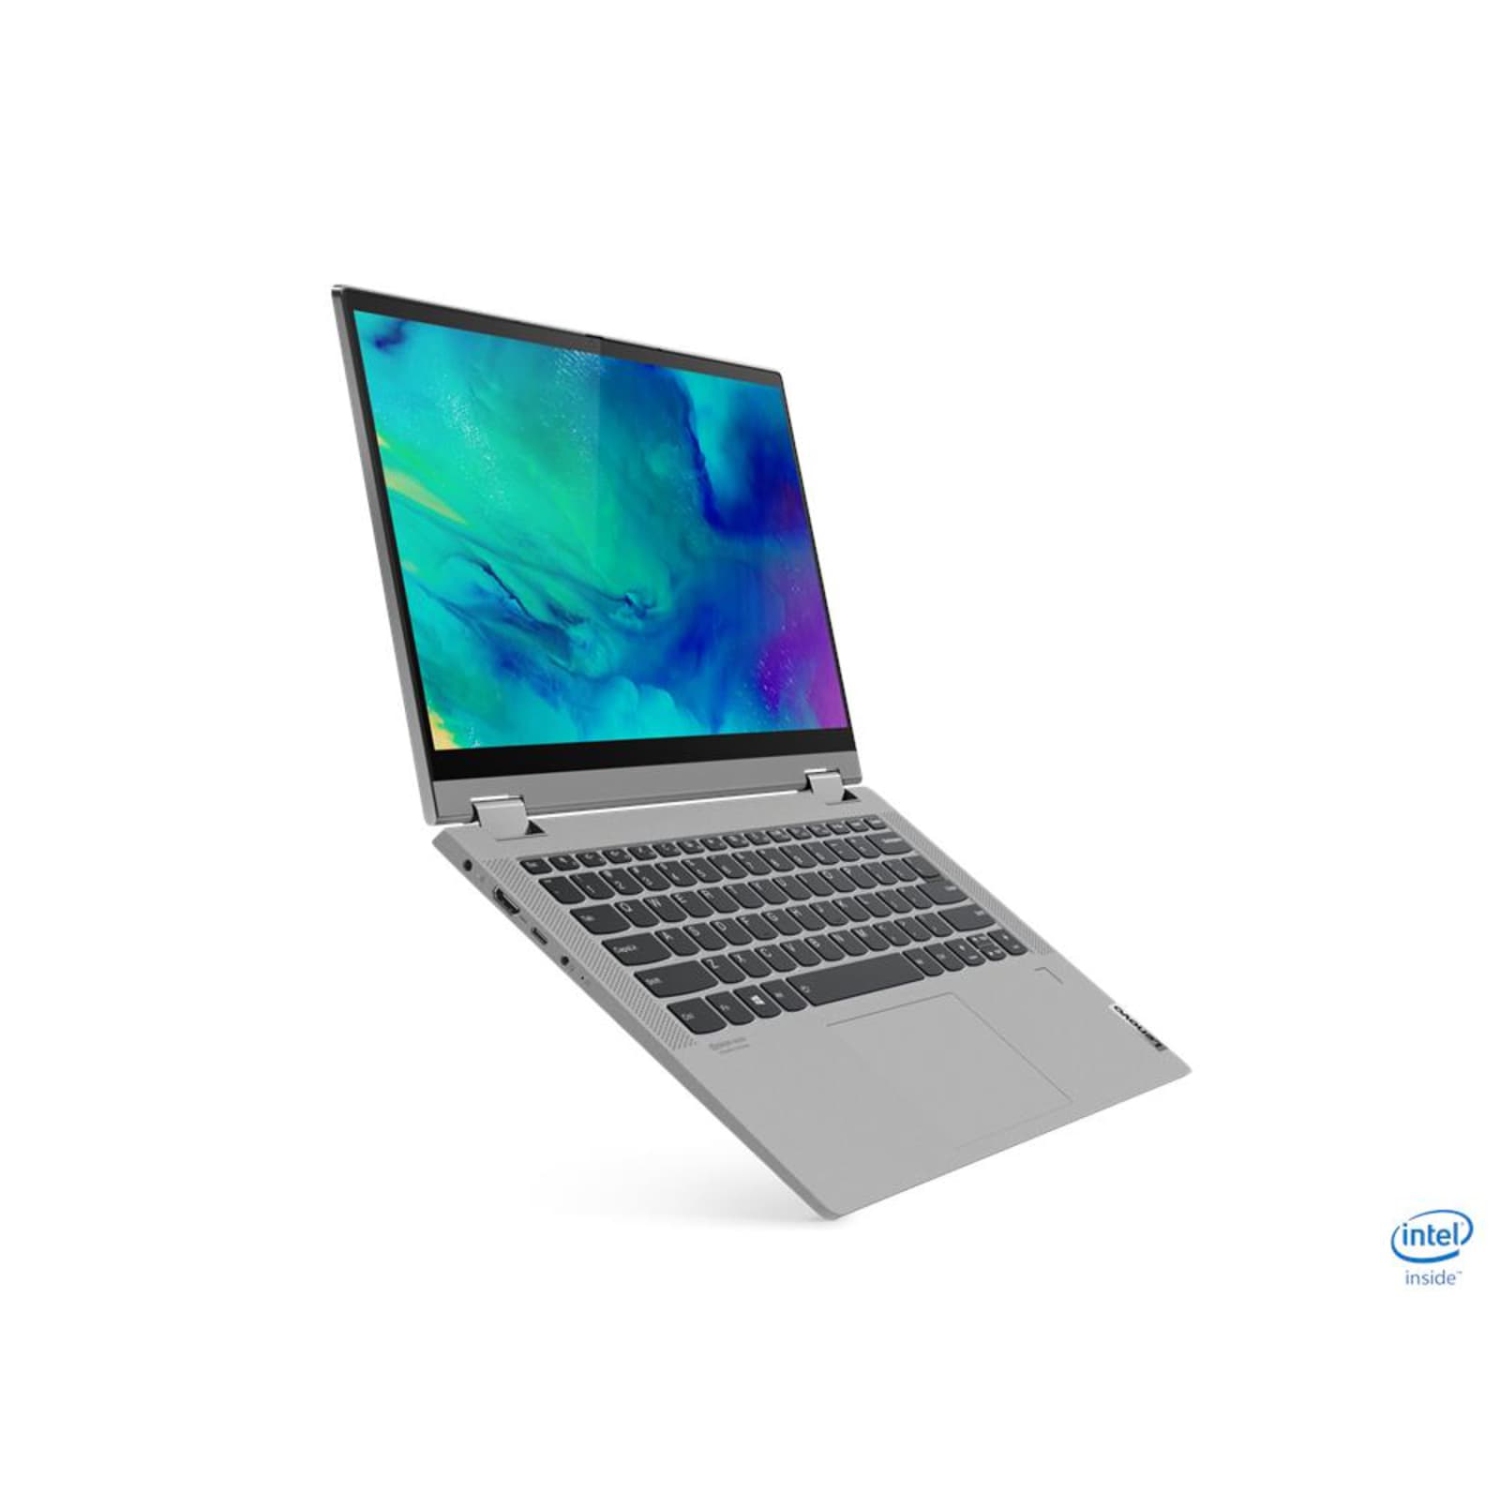 Refurbished (Excellent) Lenovo IdeaPad Flex 5 14ITL05 2-in-1 Laptop | 14" 1920x1080 FHD | Core i3-1115G4 - 256GB SSD Hard Drive - 4GB RAM | 2 cores @ 4.1 GHz Win 11 Home Silver